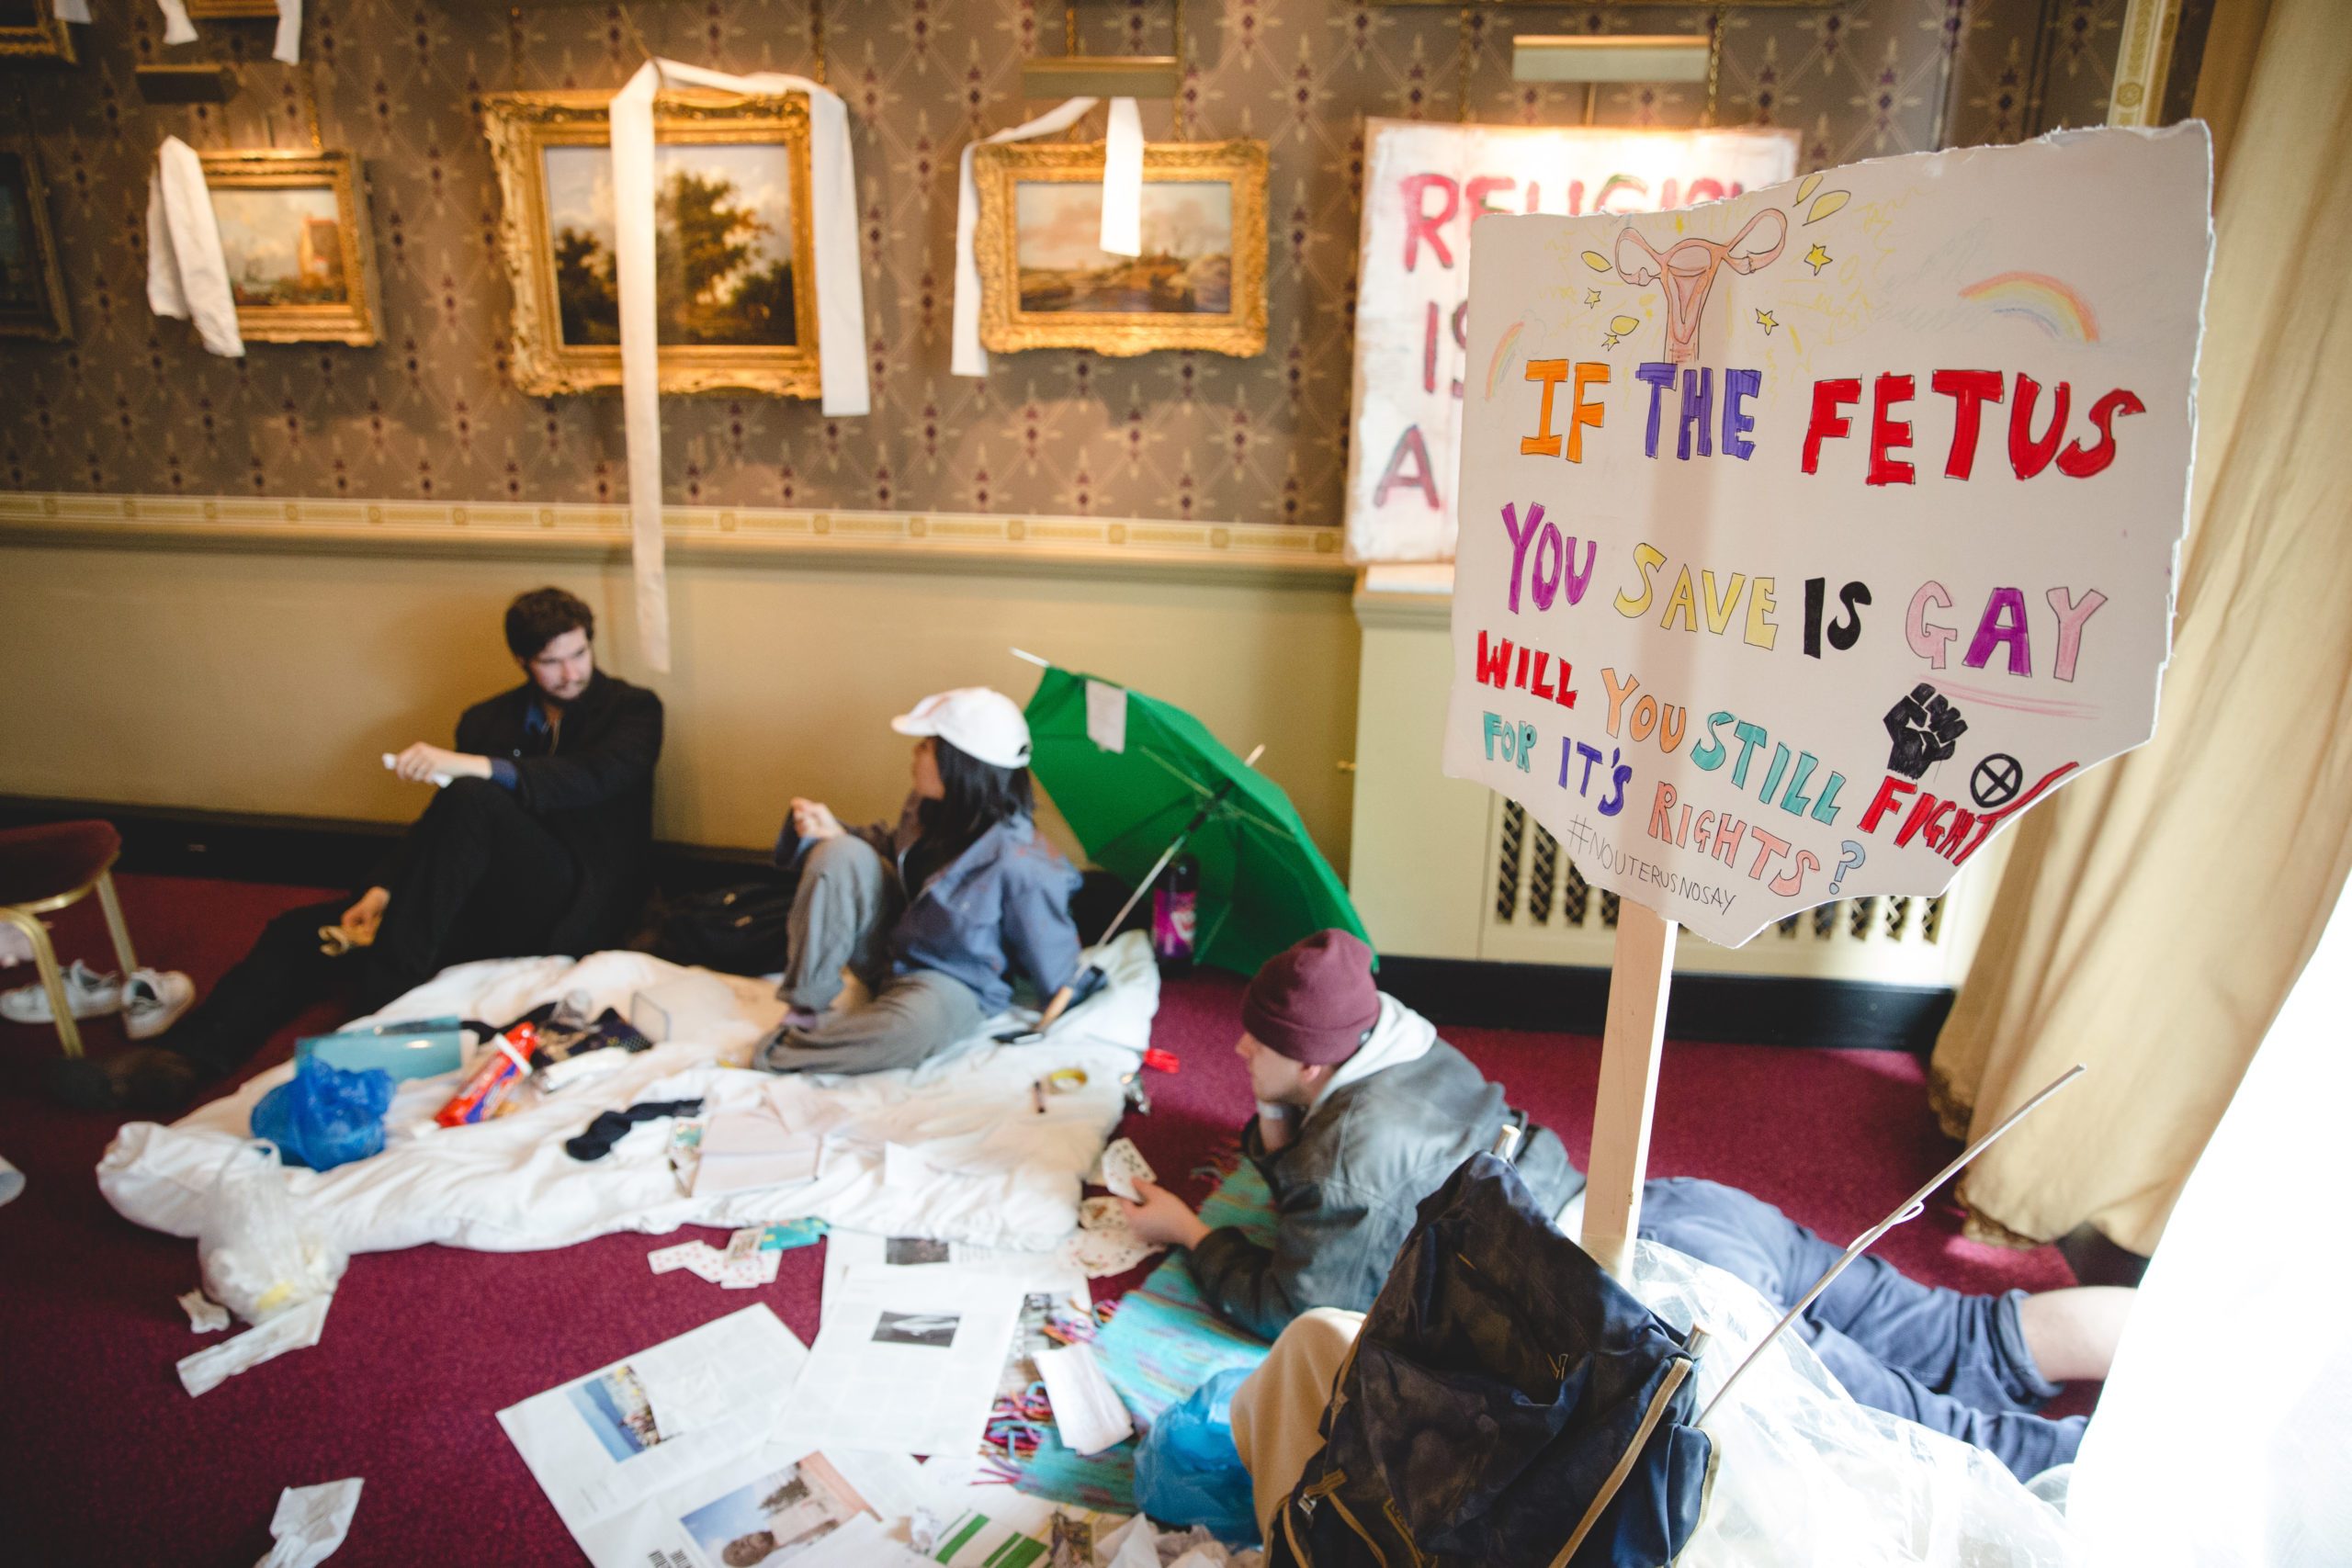 Students sit on the floor of a museum room with paintings on the walls. There is a large sign behind them with the words "If the foetus you save is gay, will you still fight for its rights?"